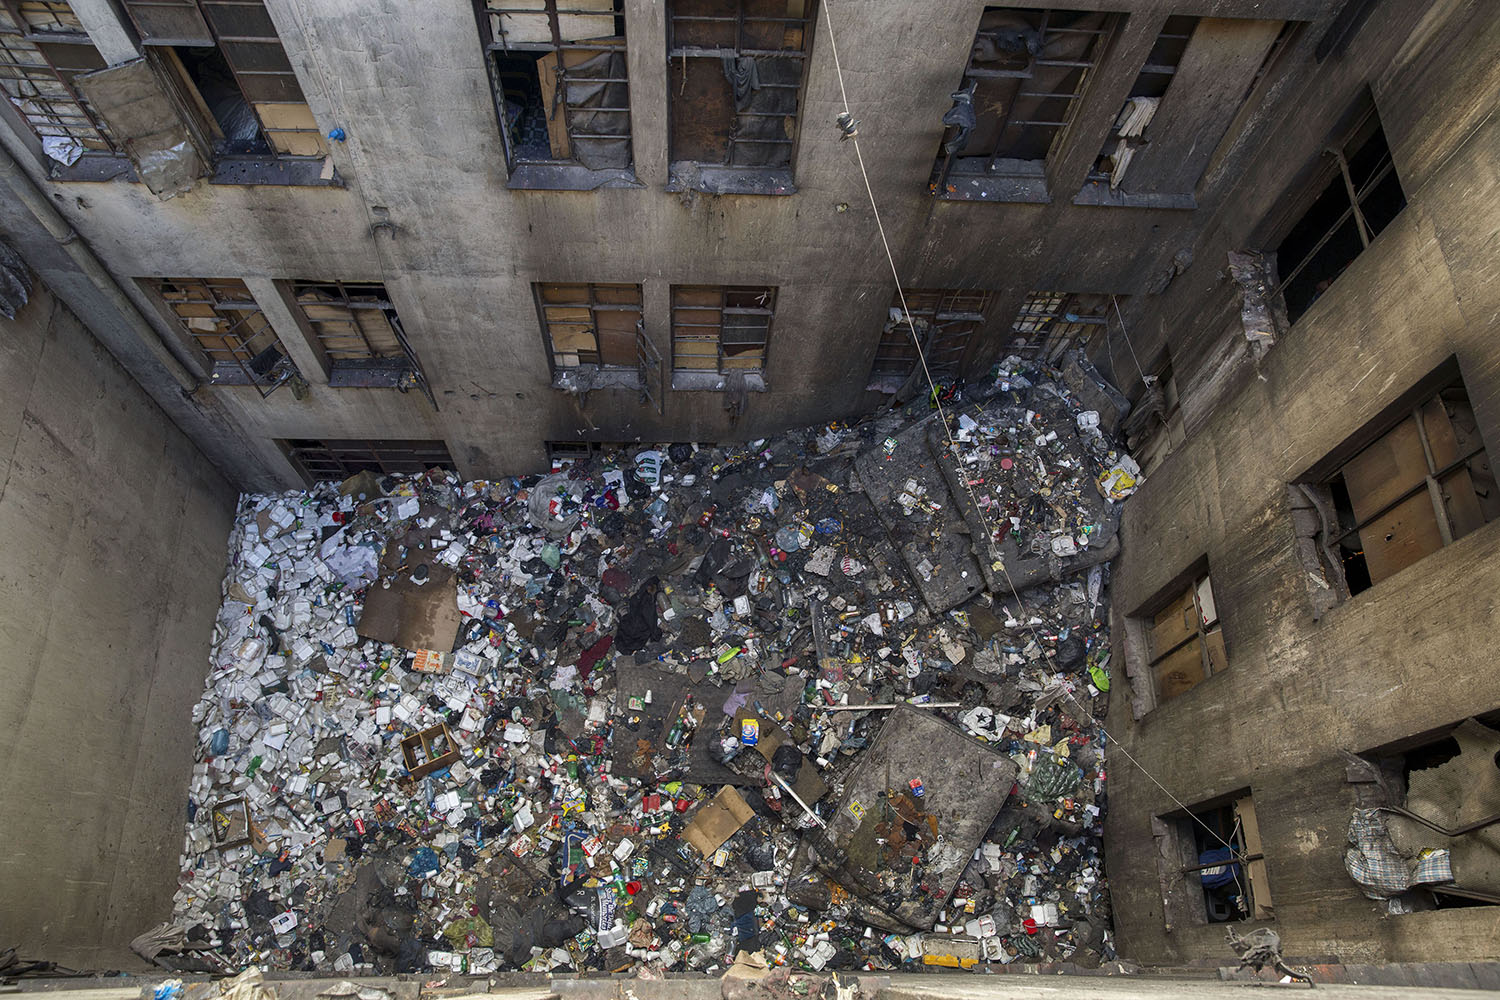 Aerial view of the rubbish filled courtyard at one of the derelict 'hijacked' buildings, Aug. 2, 2015.